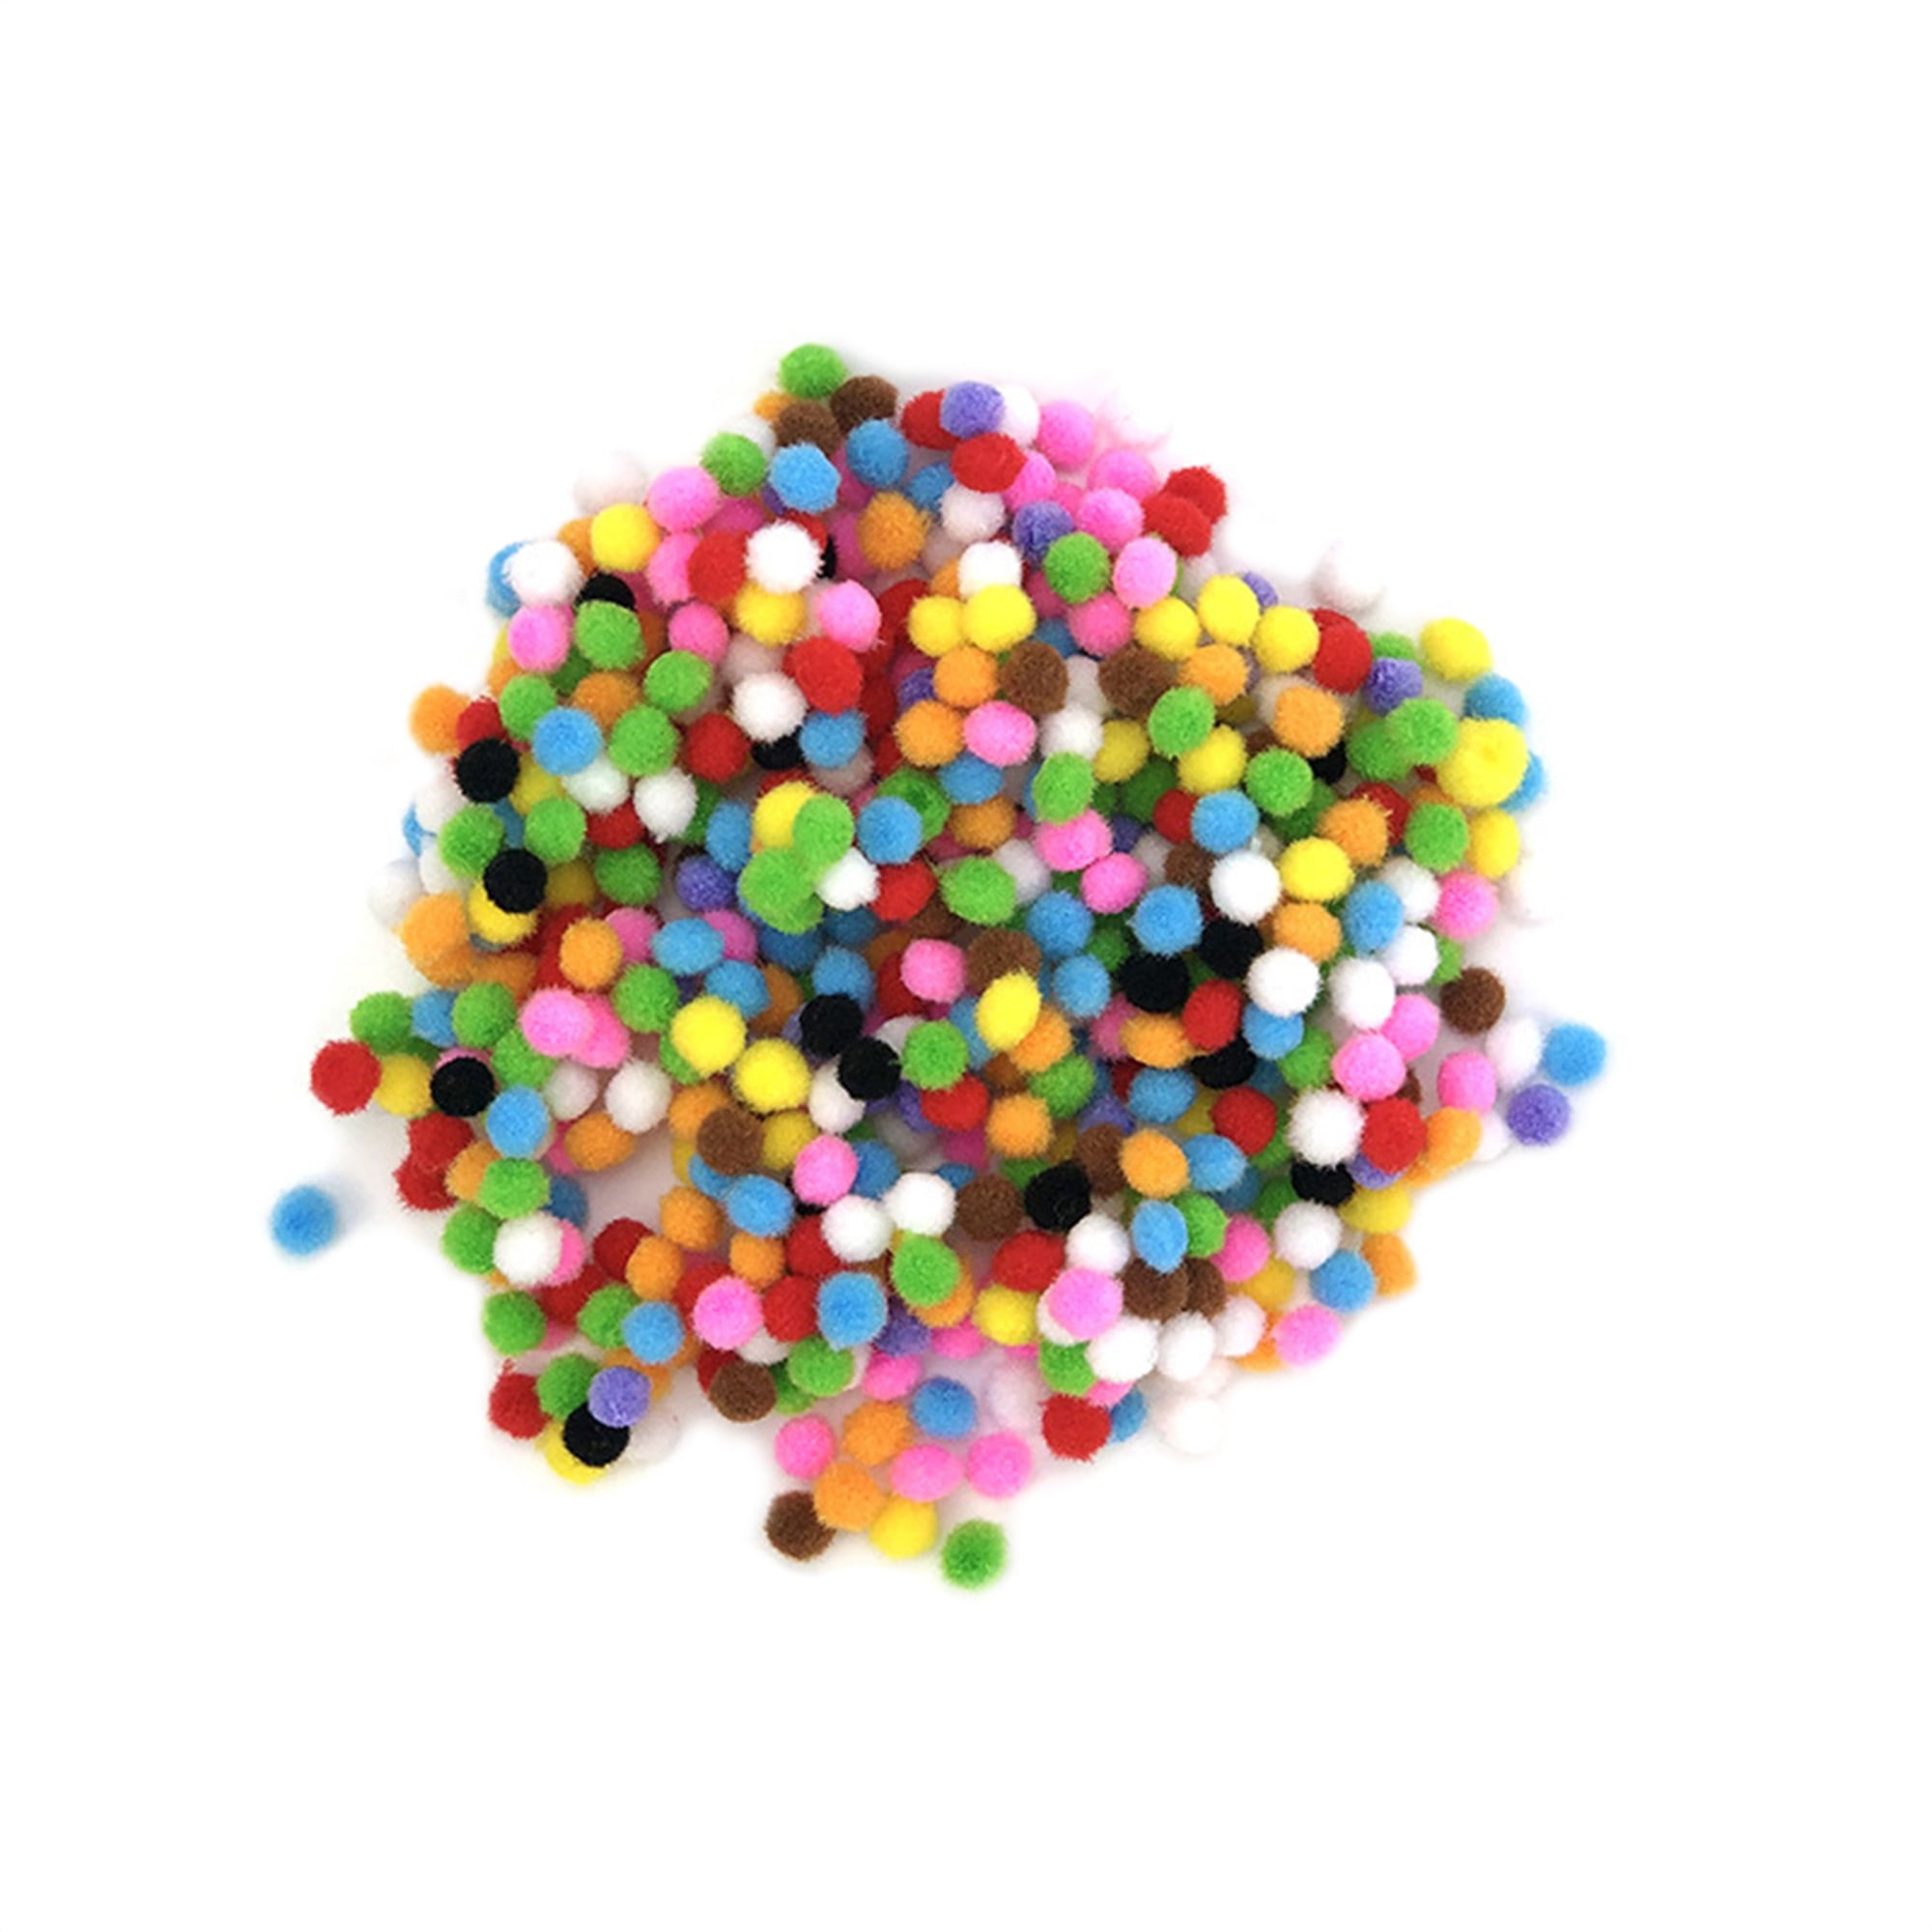 Doodle Craft & Stationery - Colored Cotton Balls PNC so many tiny